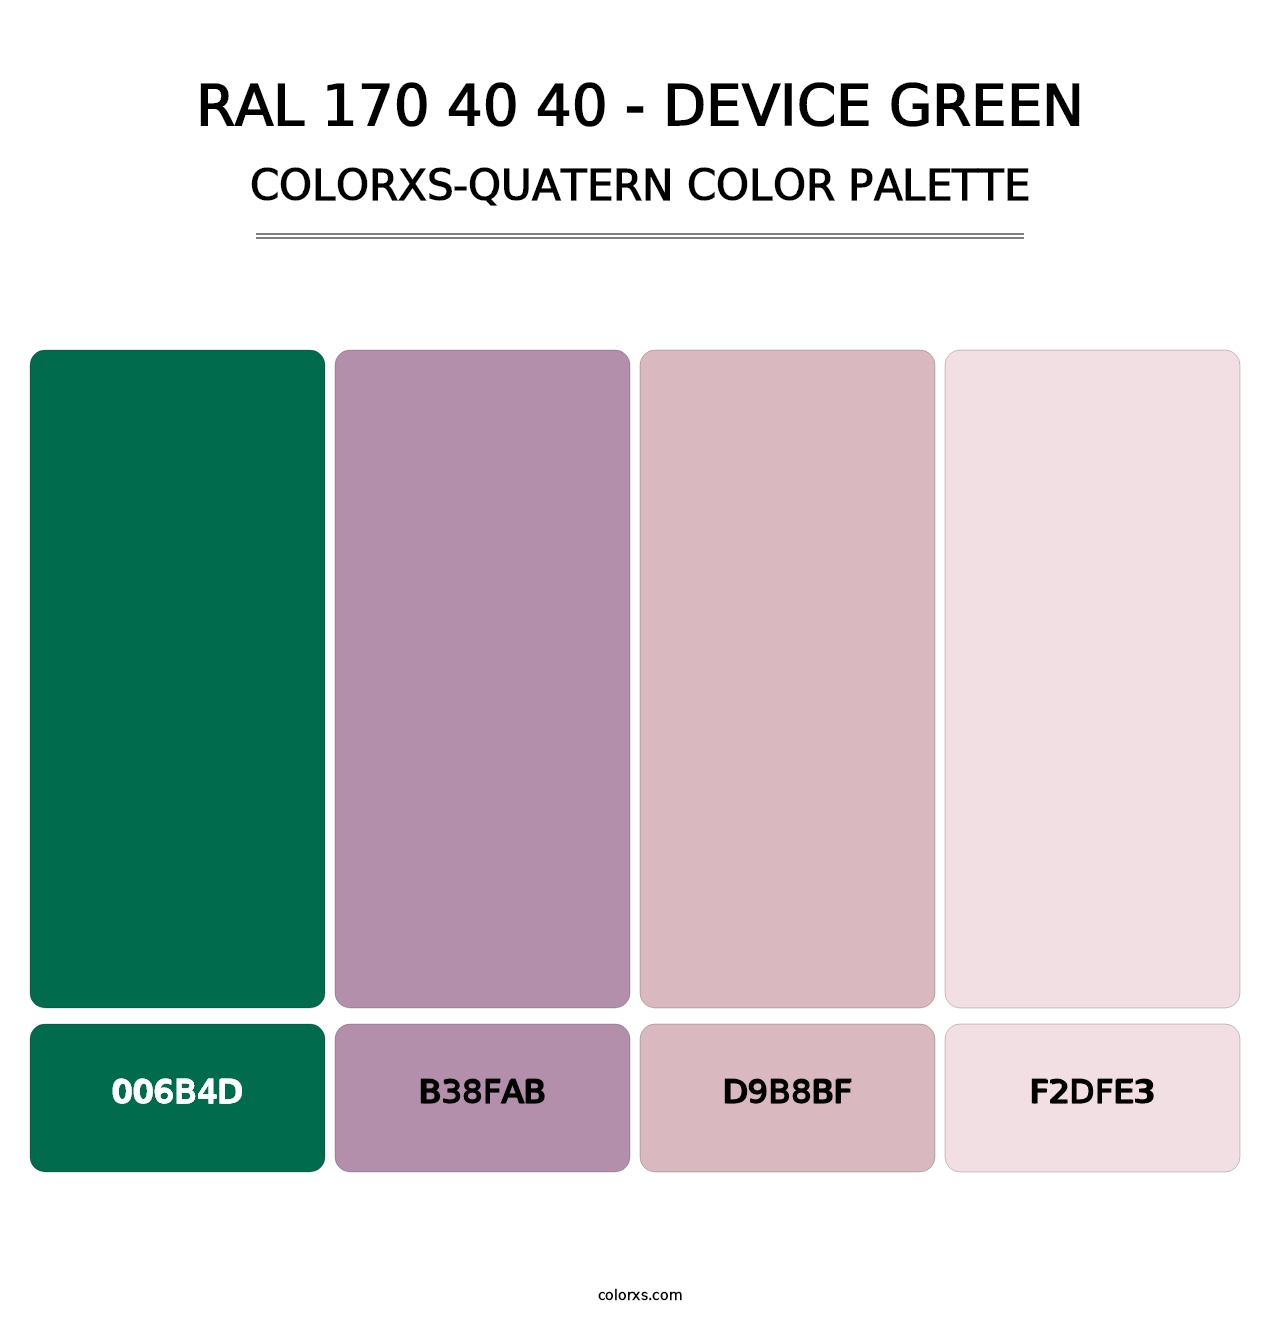 RAL 170 40 40 - Device Green - Colorxs Quatern Palette